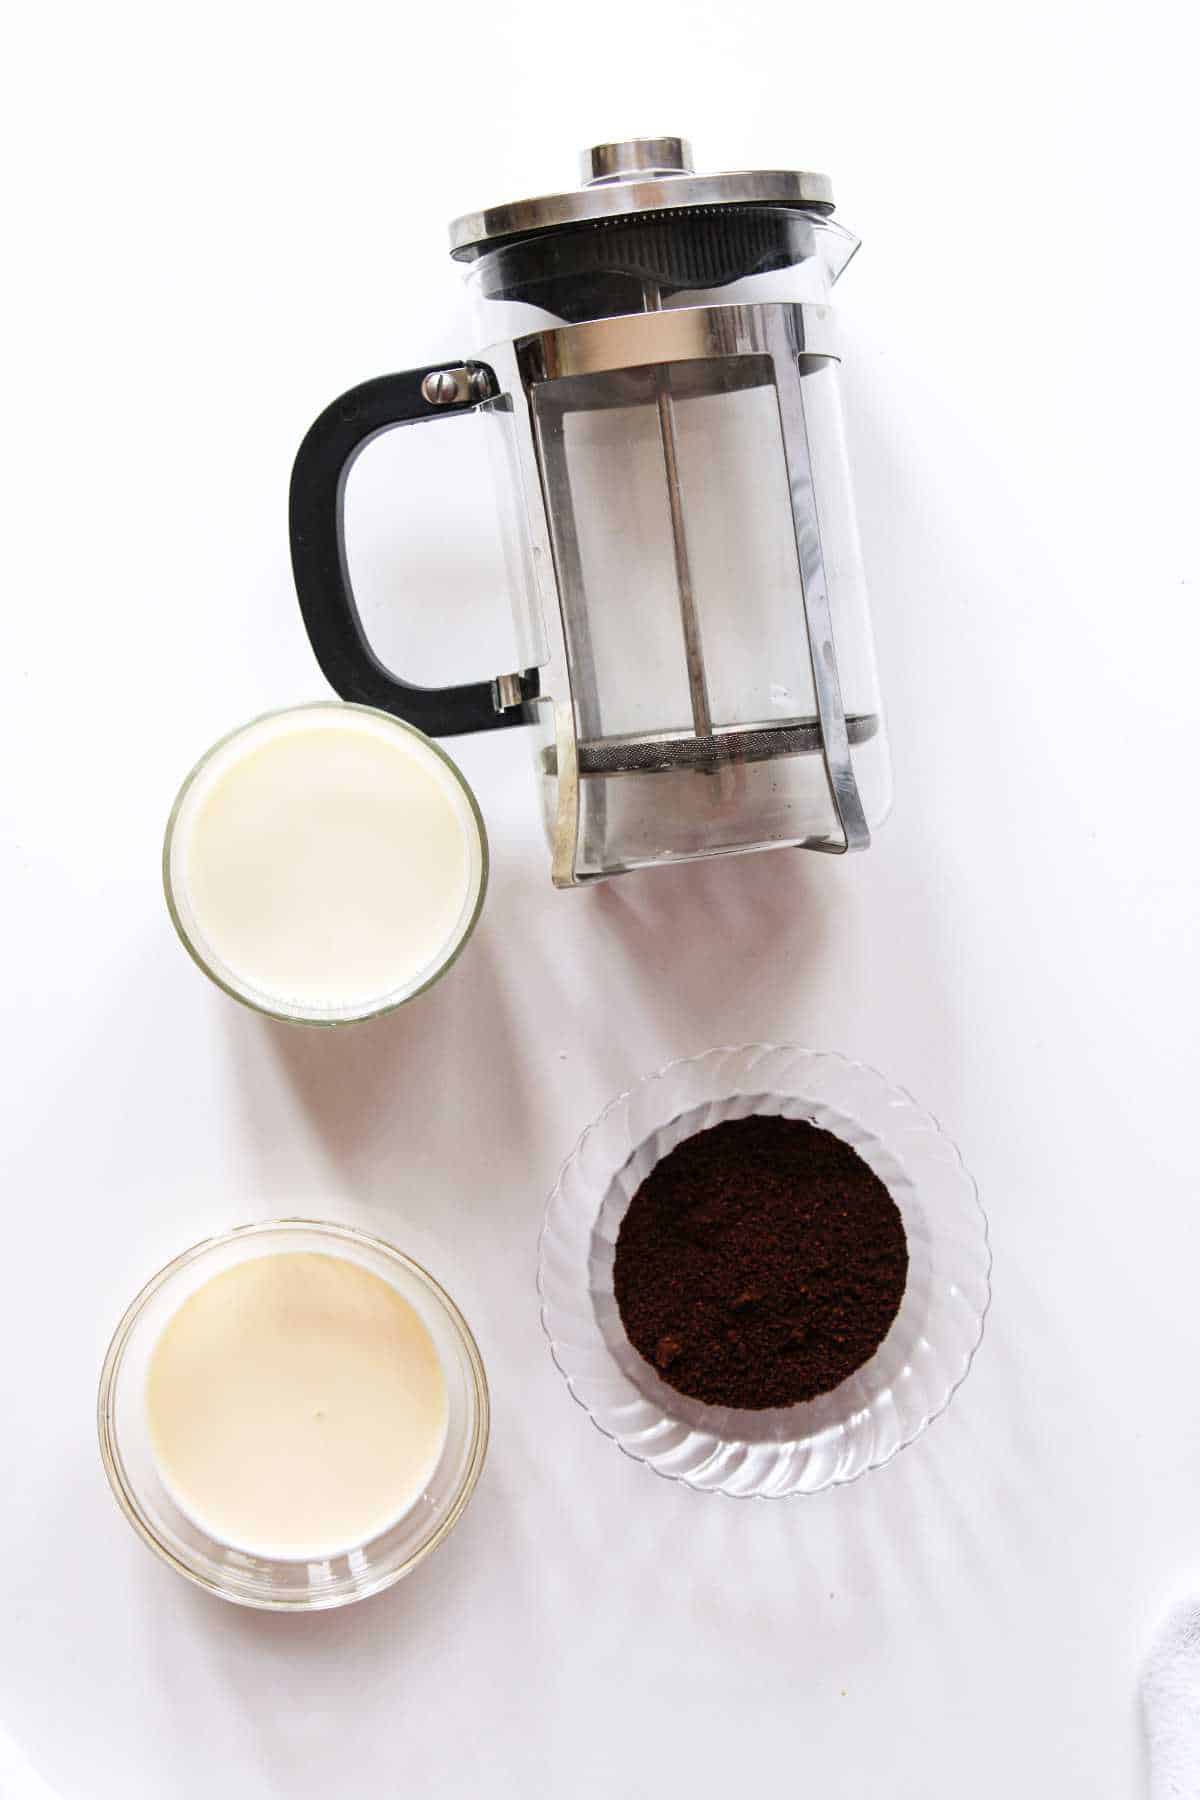 Fremch coffee press with coffee grounds, cream, and milk on a white background.